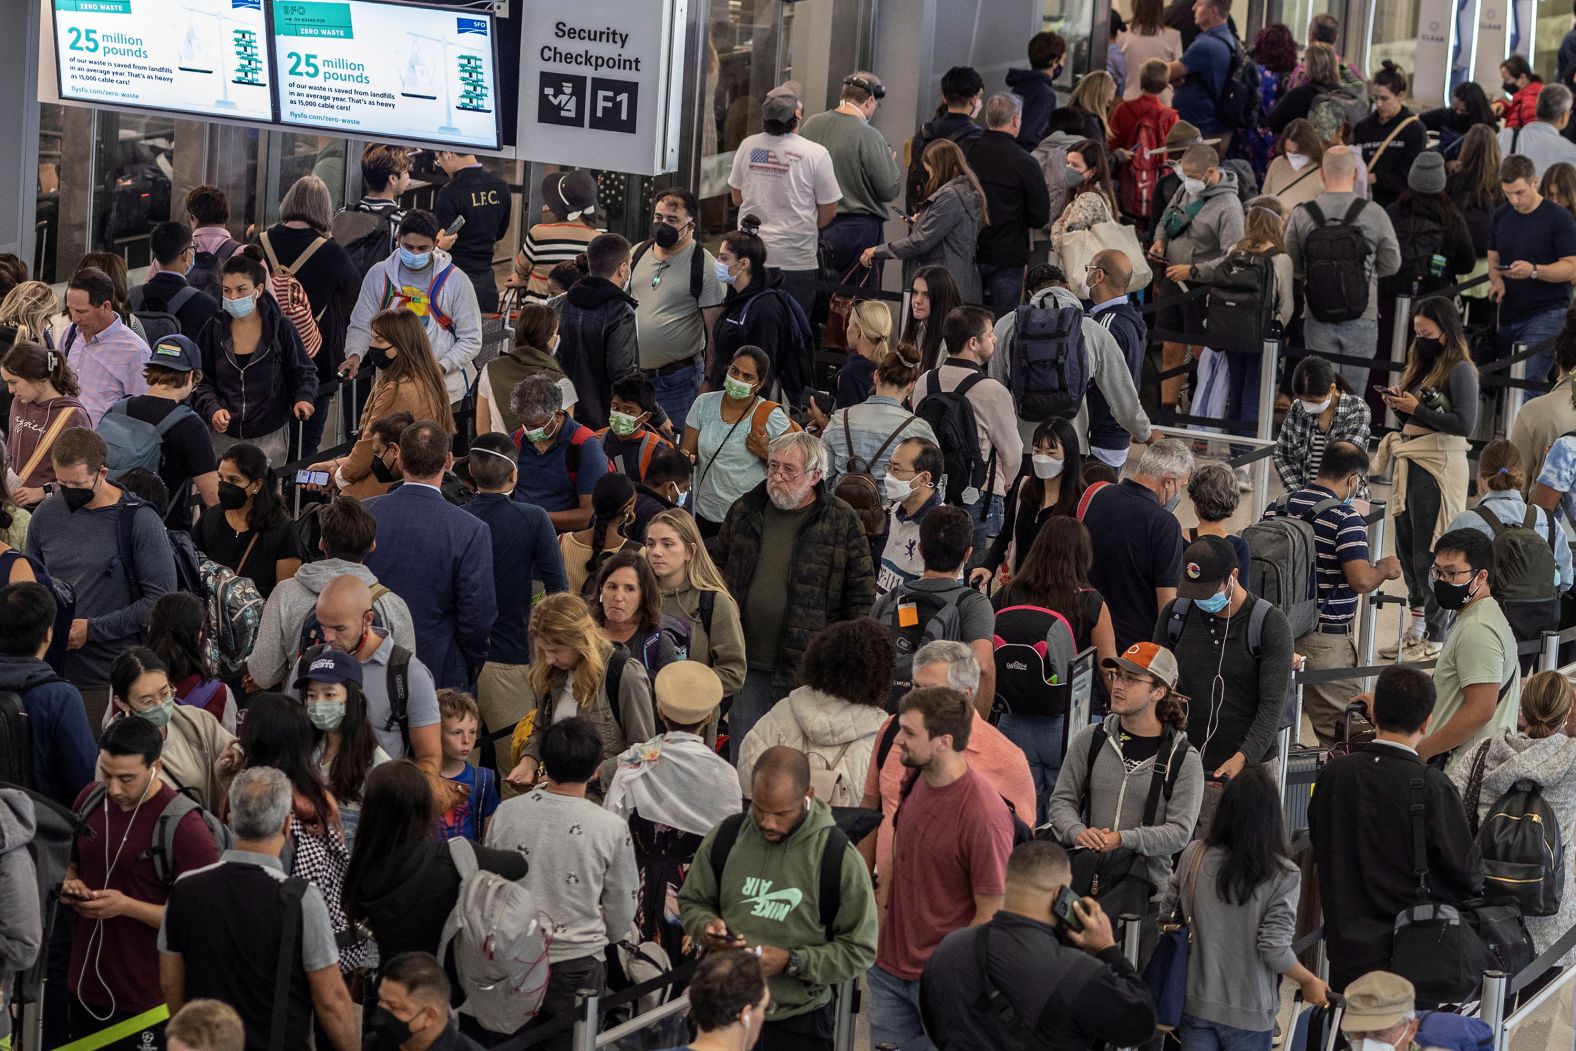 Travelers make their way through security at the San Francisco International Airport on Thursday.